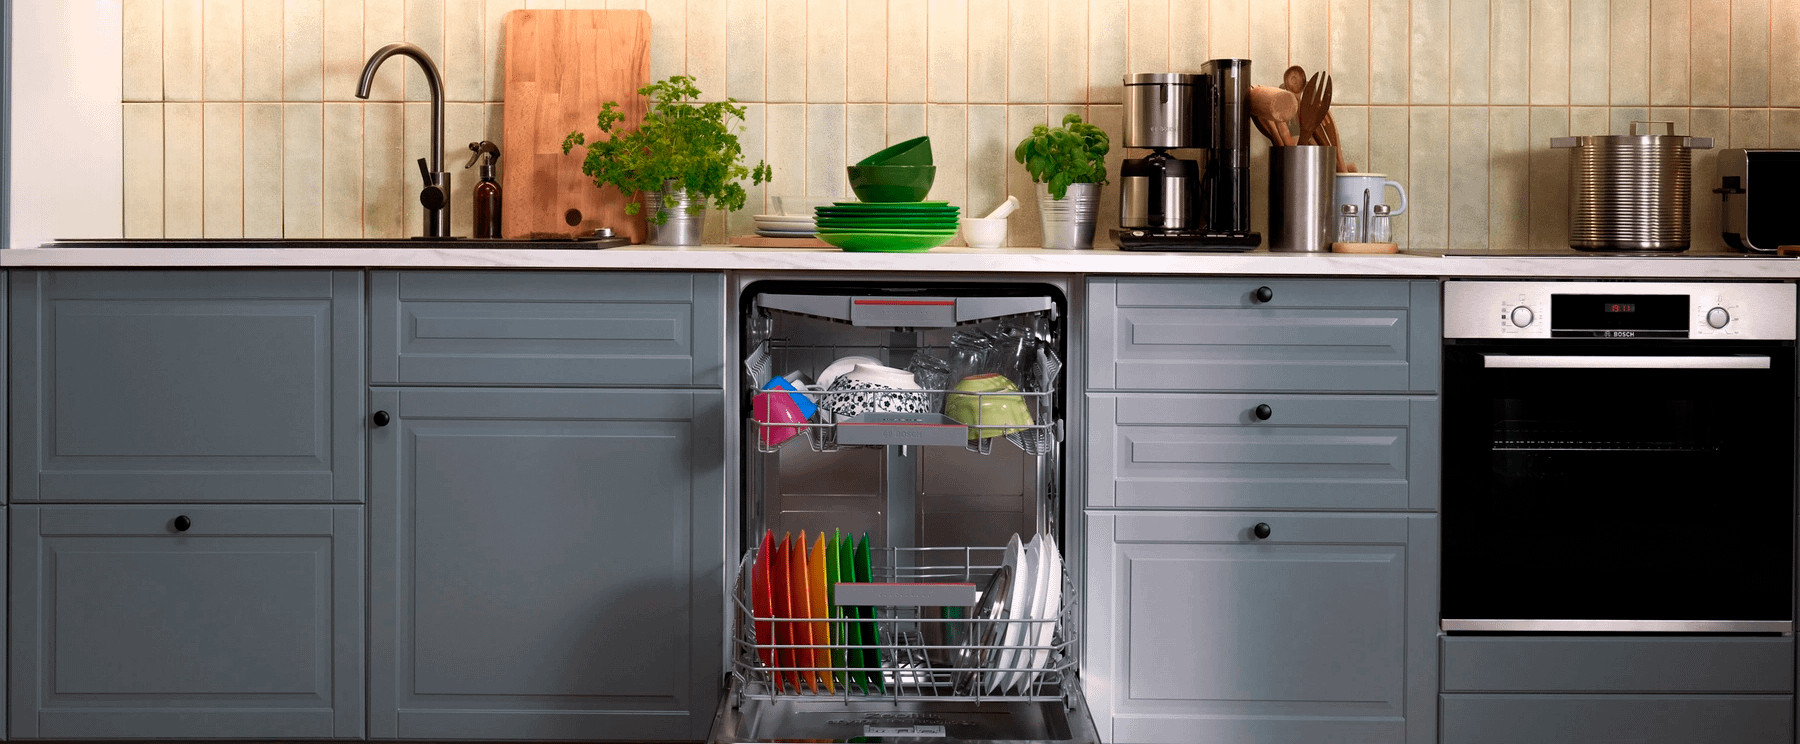 Opened dishwasher integrated into blue cabinets, with colourful plates arranged in rainbow order.